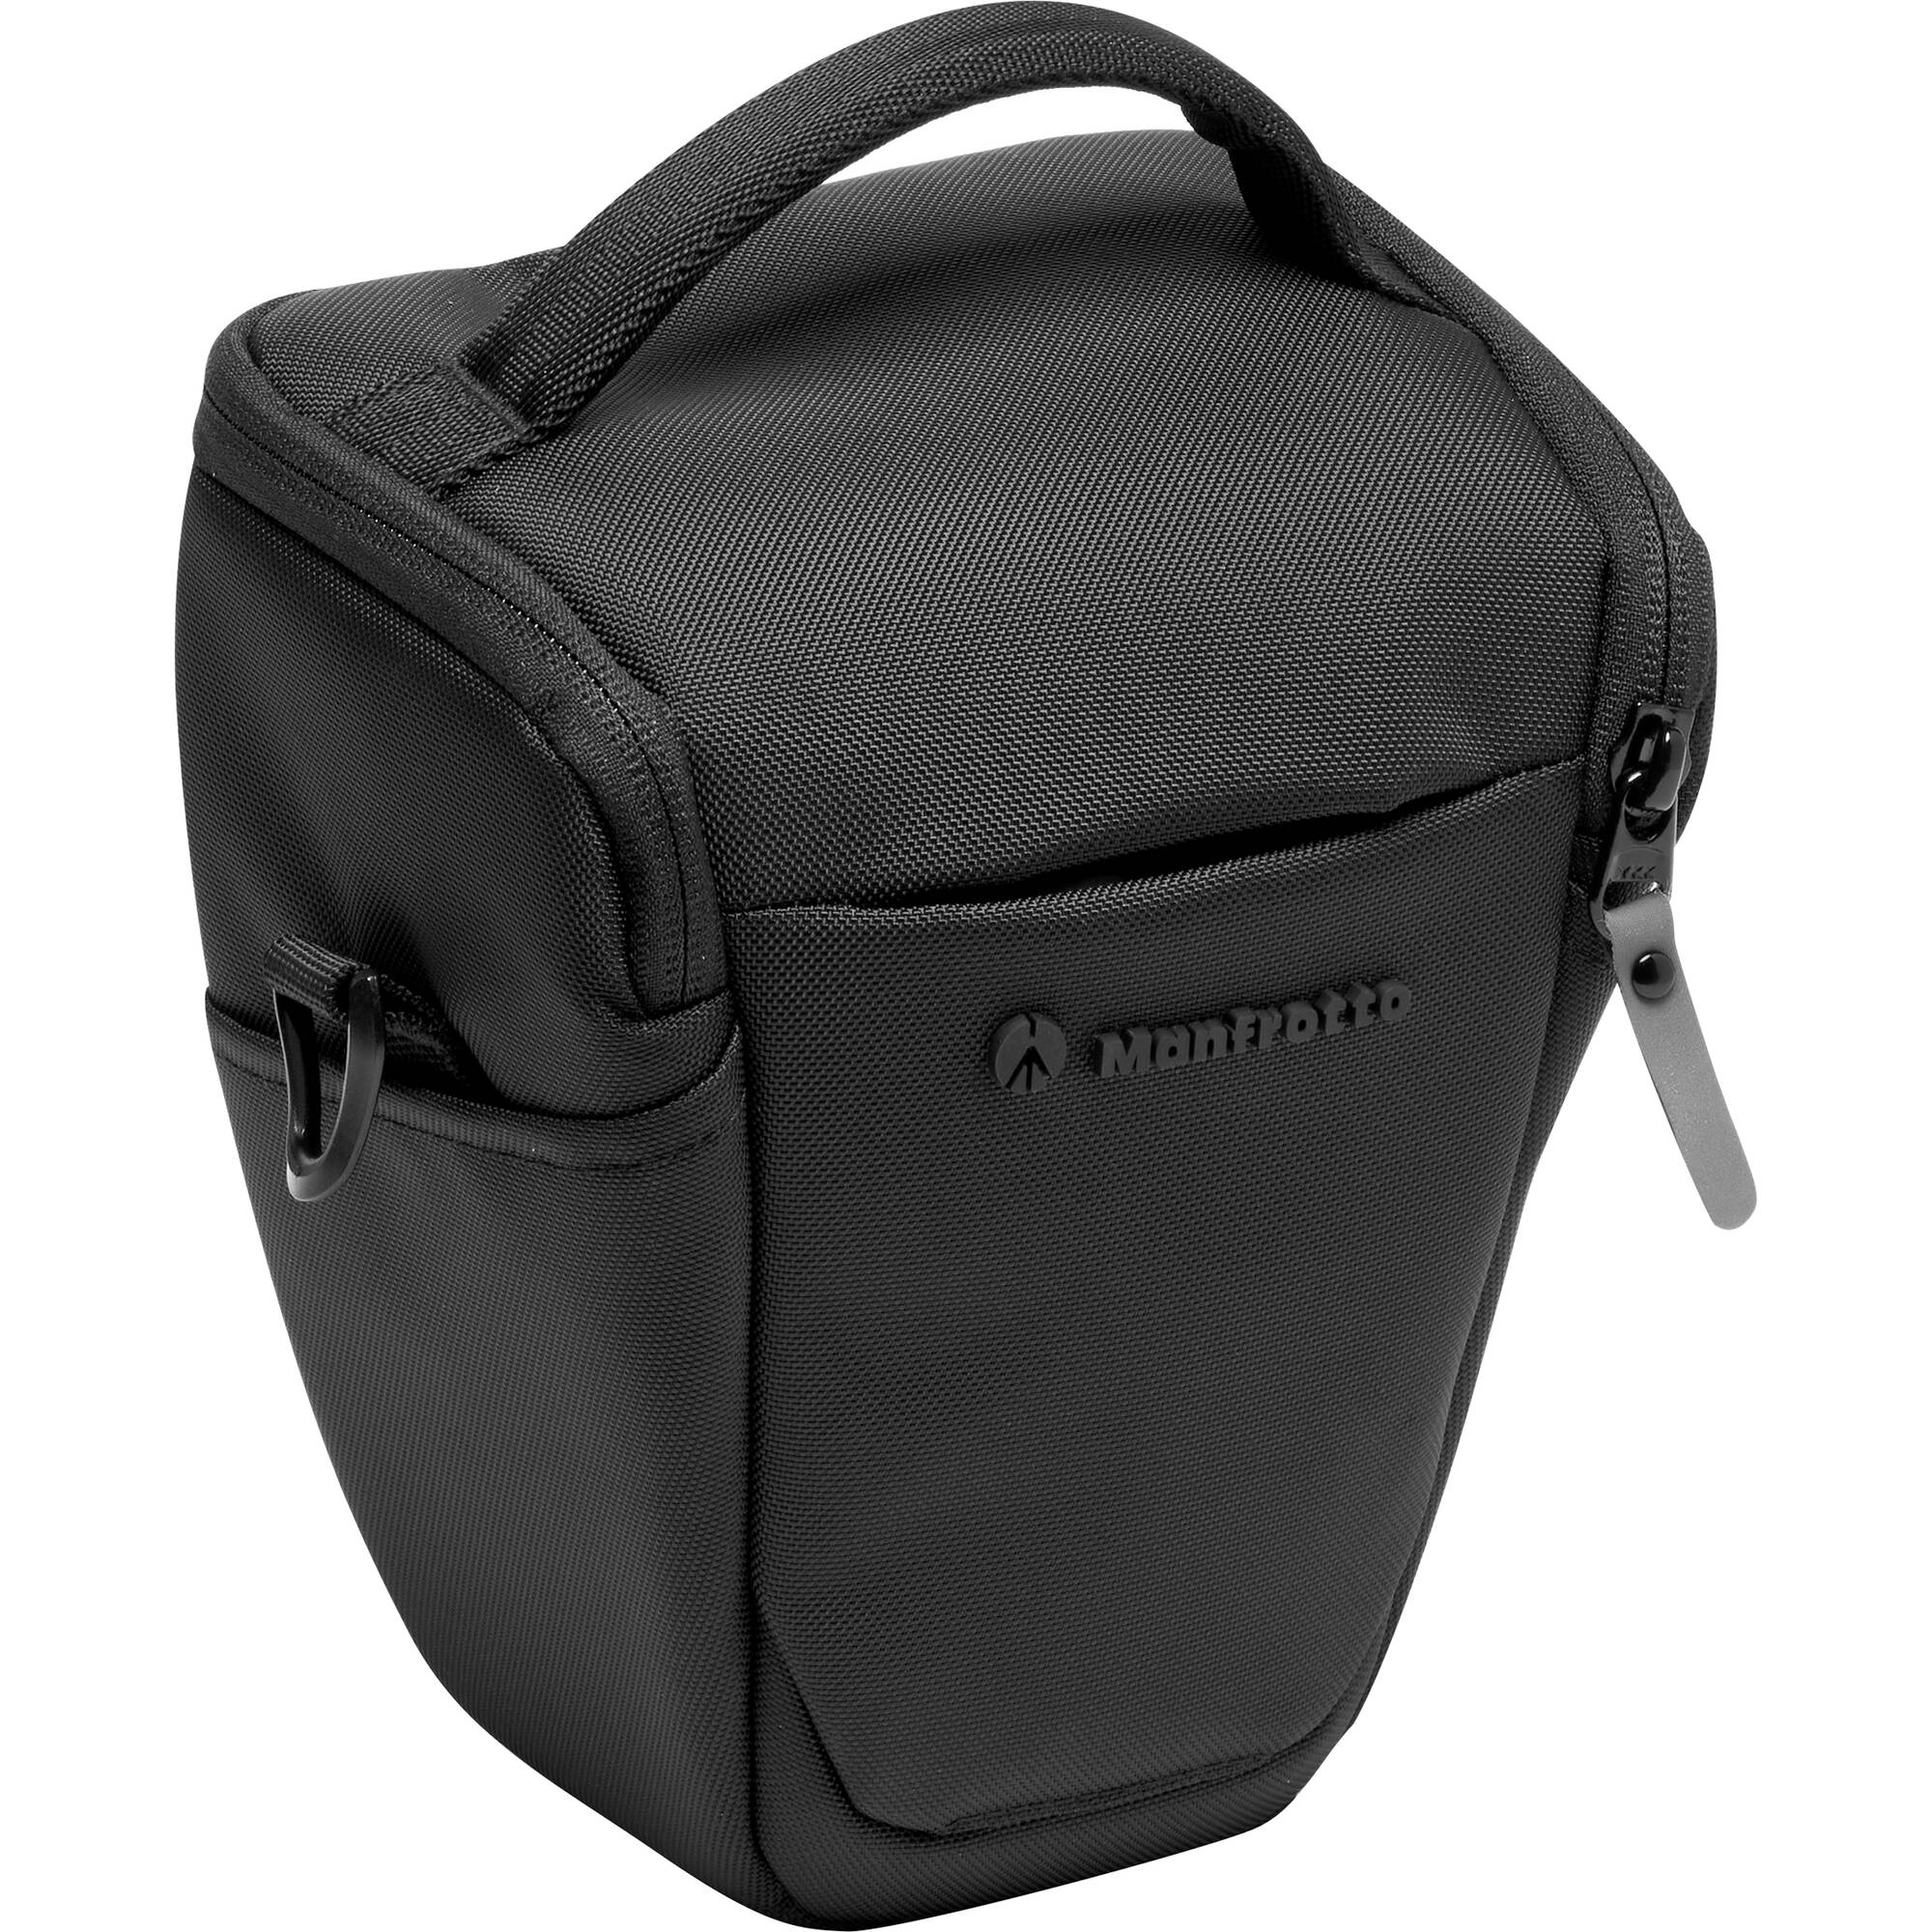 Bag Manfrotto. Holster avancé S III